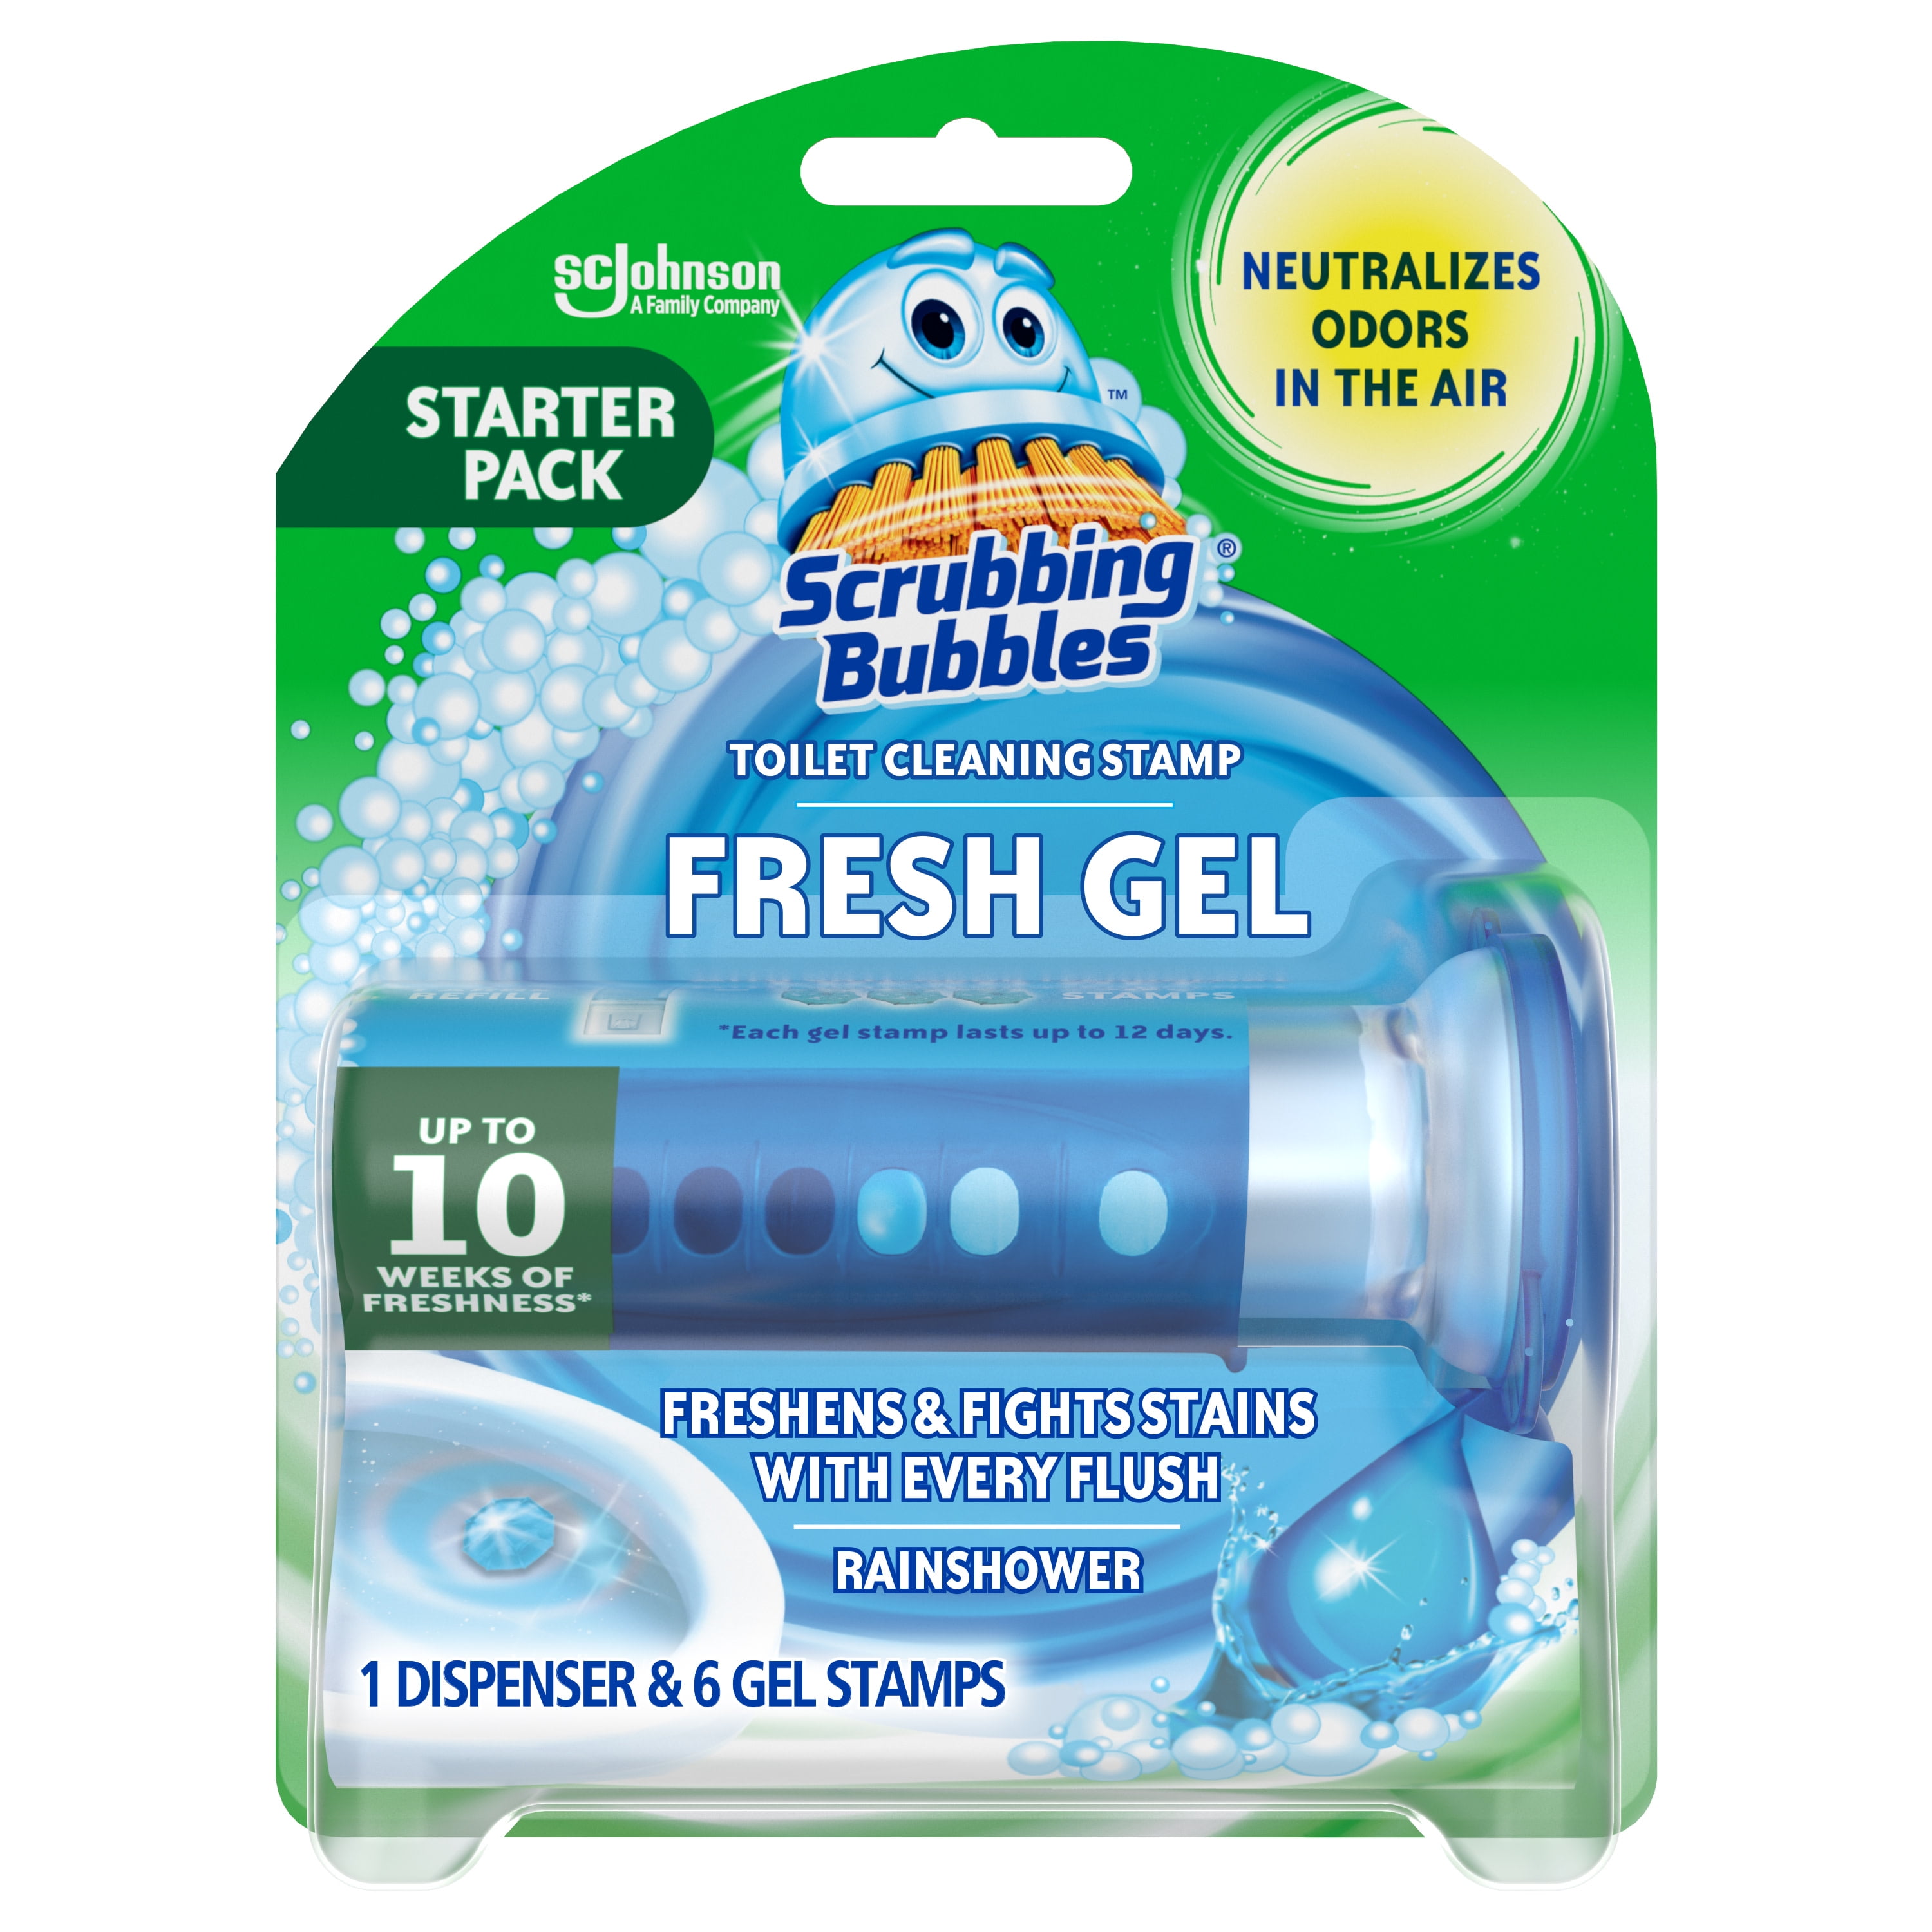 Scrubbing Bubbles Fresh Gel Toilet Cleaning Stamp, Rainshower, Dispenser with 6 Gel Stamps, 1.34 Oz